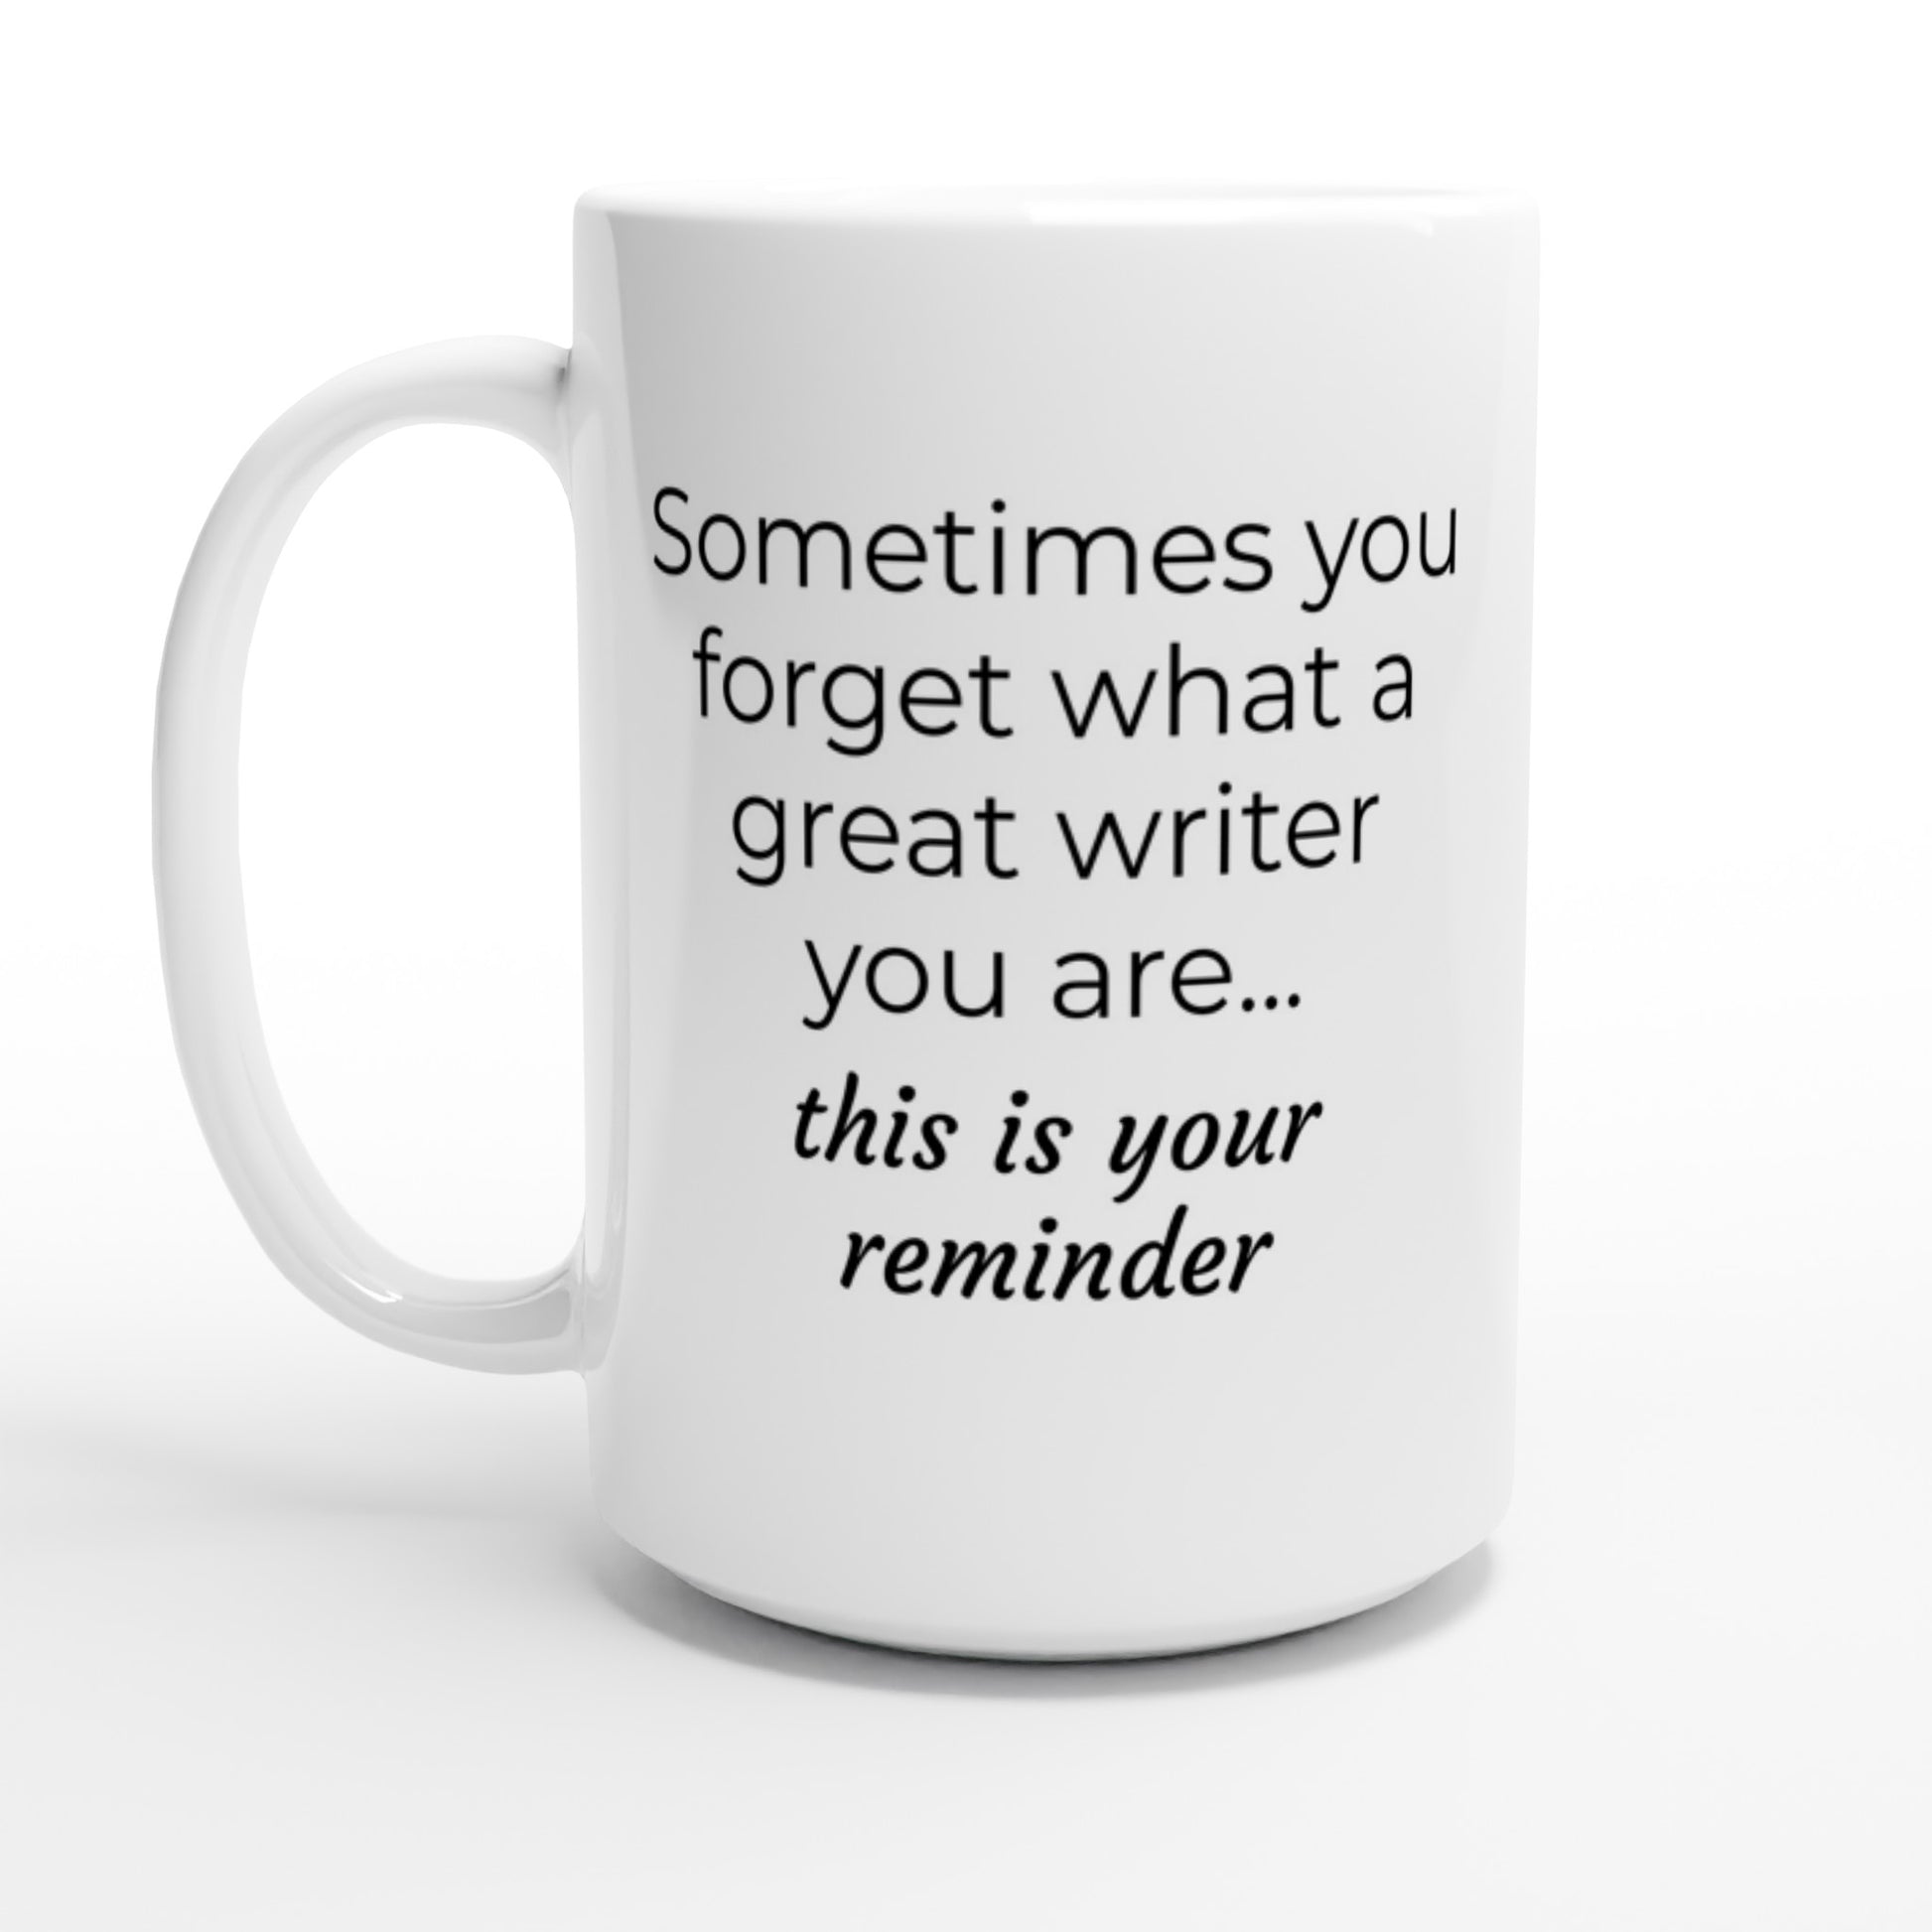 A Sometimes you forget what a great writer you are... mug that reminds you of your belief in your writing skills and boosts your confidence as a writer.